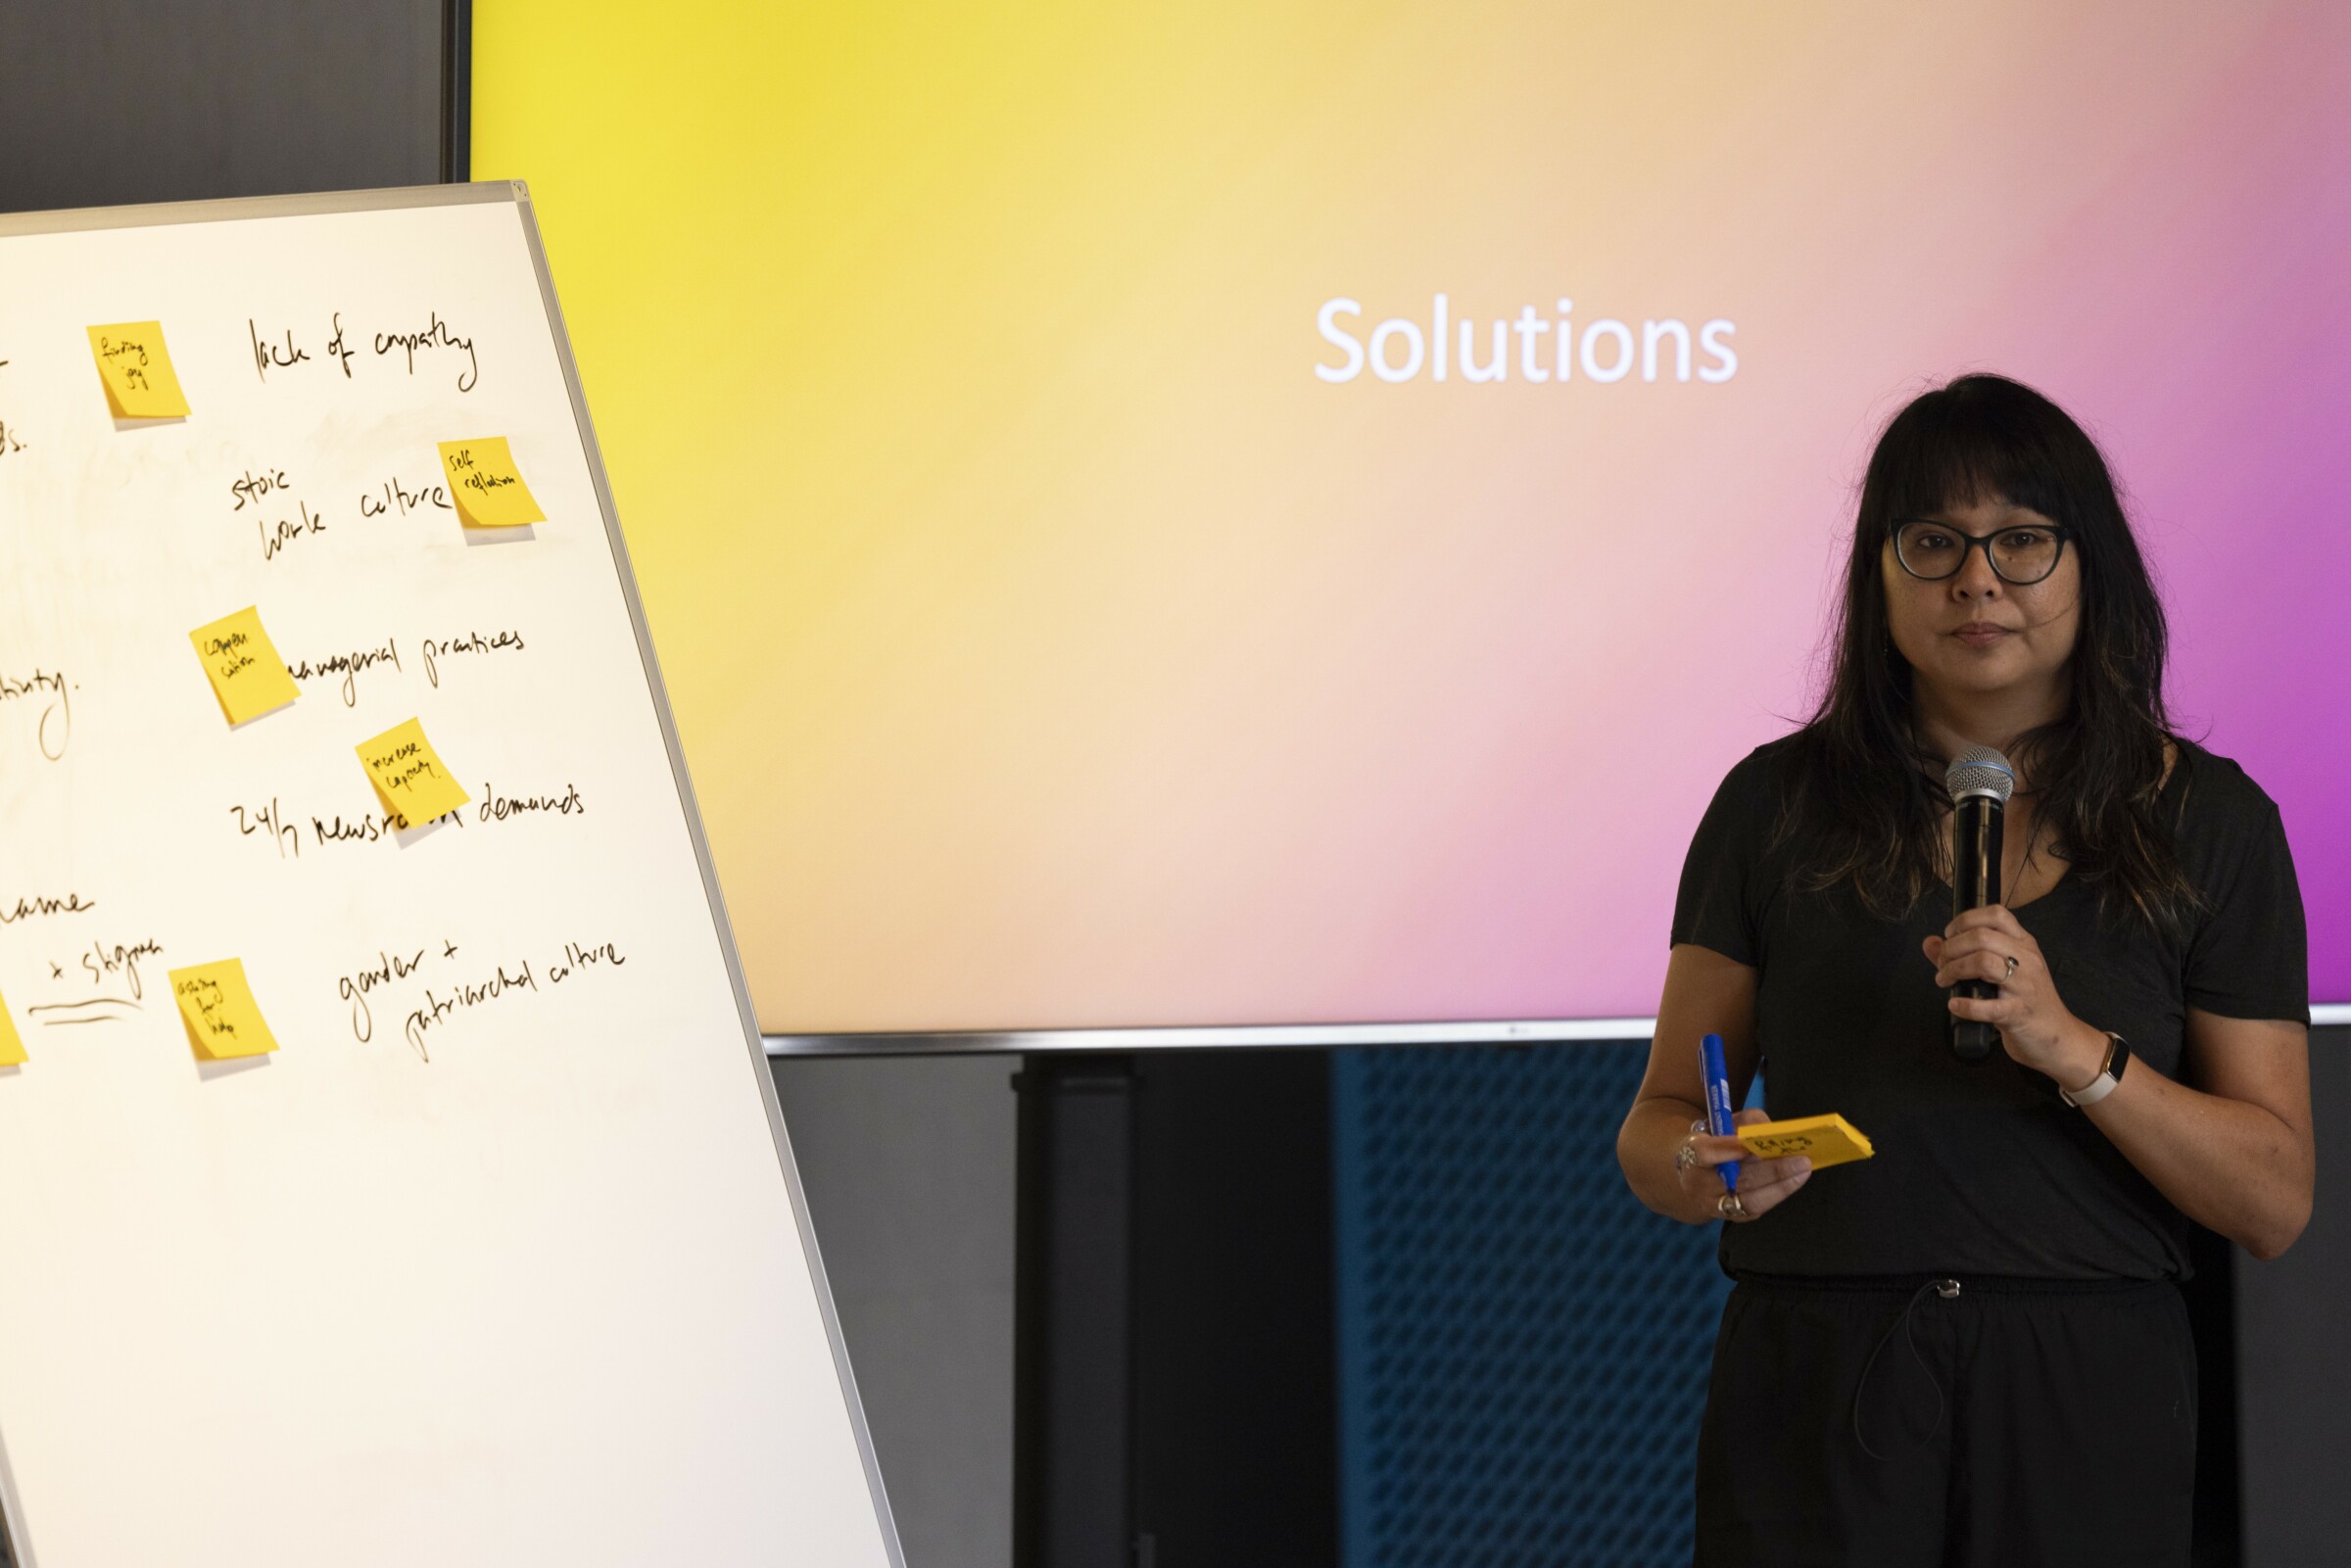 AX Mina (Ana) stands in front of a screen that displays the word "Solutions". To the left of the photo is a white board with notes and yellow post-its. She is holding a microphone in one hand and some post-its in the other. The audience is shown in the foreground, out of focus. She wears glasses and is dressed in simple black clothing. Photo: Alex Grymanis